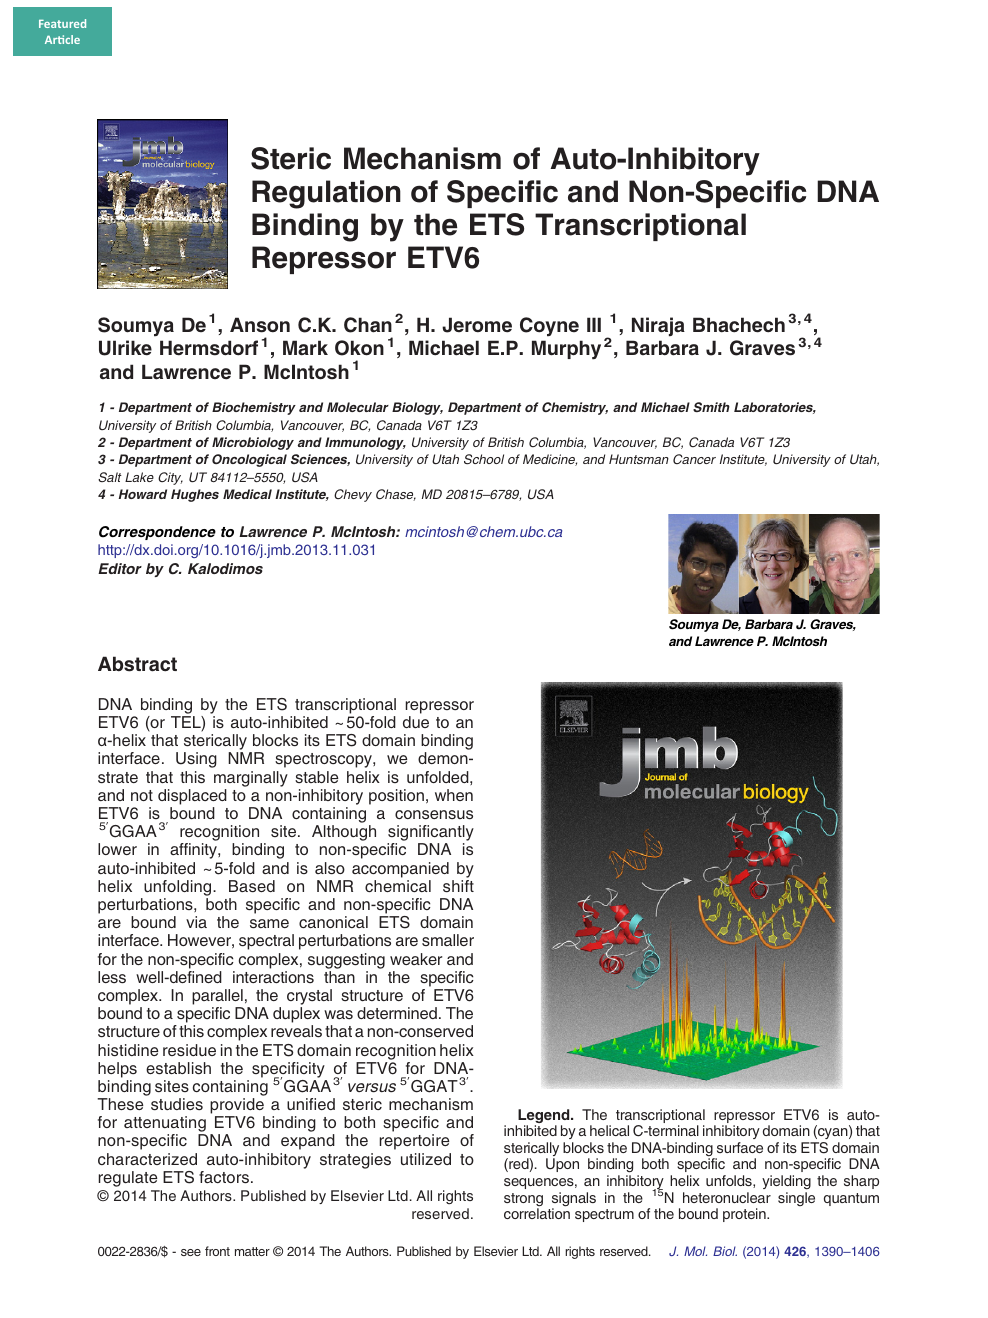 Steric Mechanism Of Auto Inhibitory Regulation Of Specific And Non Specific Dna Binding By The Ets Transcriptional Repressor Etv6 Topic Of Research Paper In Biological Sciences Download Scholarly Article Pdf And Read For